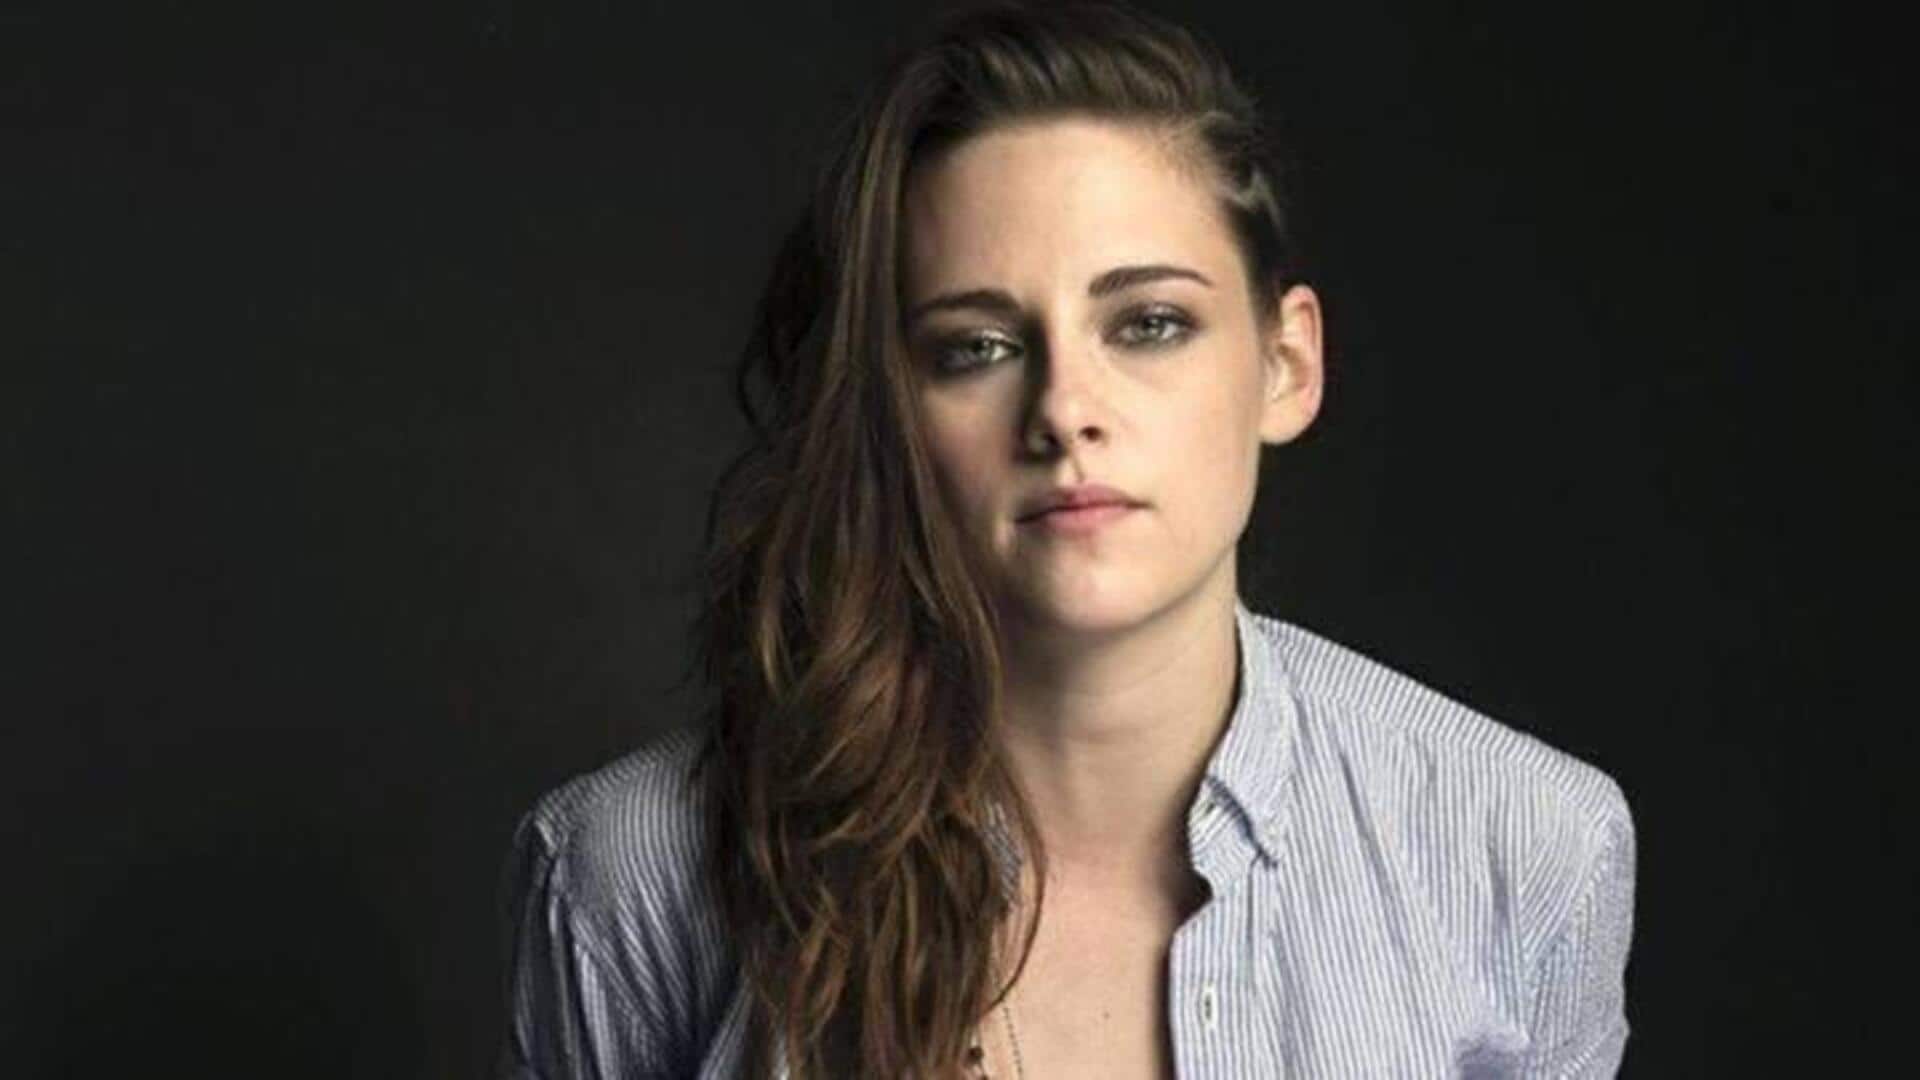 Kristen Stewart's directorial debut is about 'incest and periods'